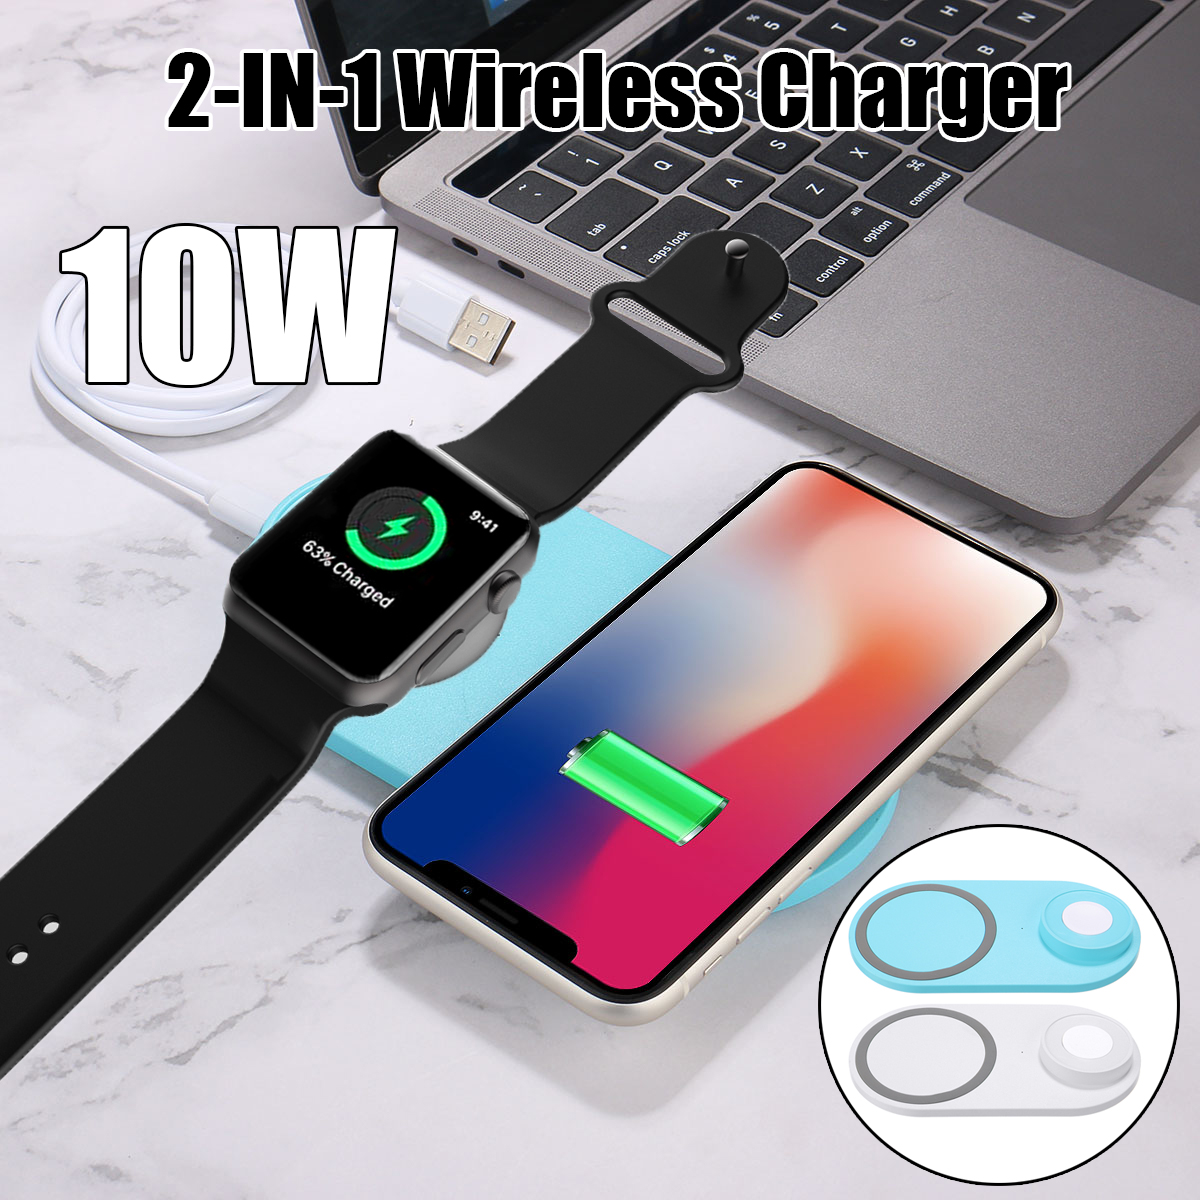 2-In-1-10W-Wireless-Charger-Phone-Charger-Watch-Charger-Fast-Charging-for-Qi-enabled-Smart-Phone-for-1627963-1